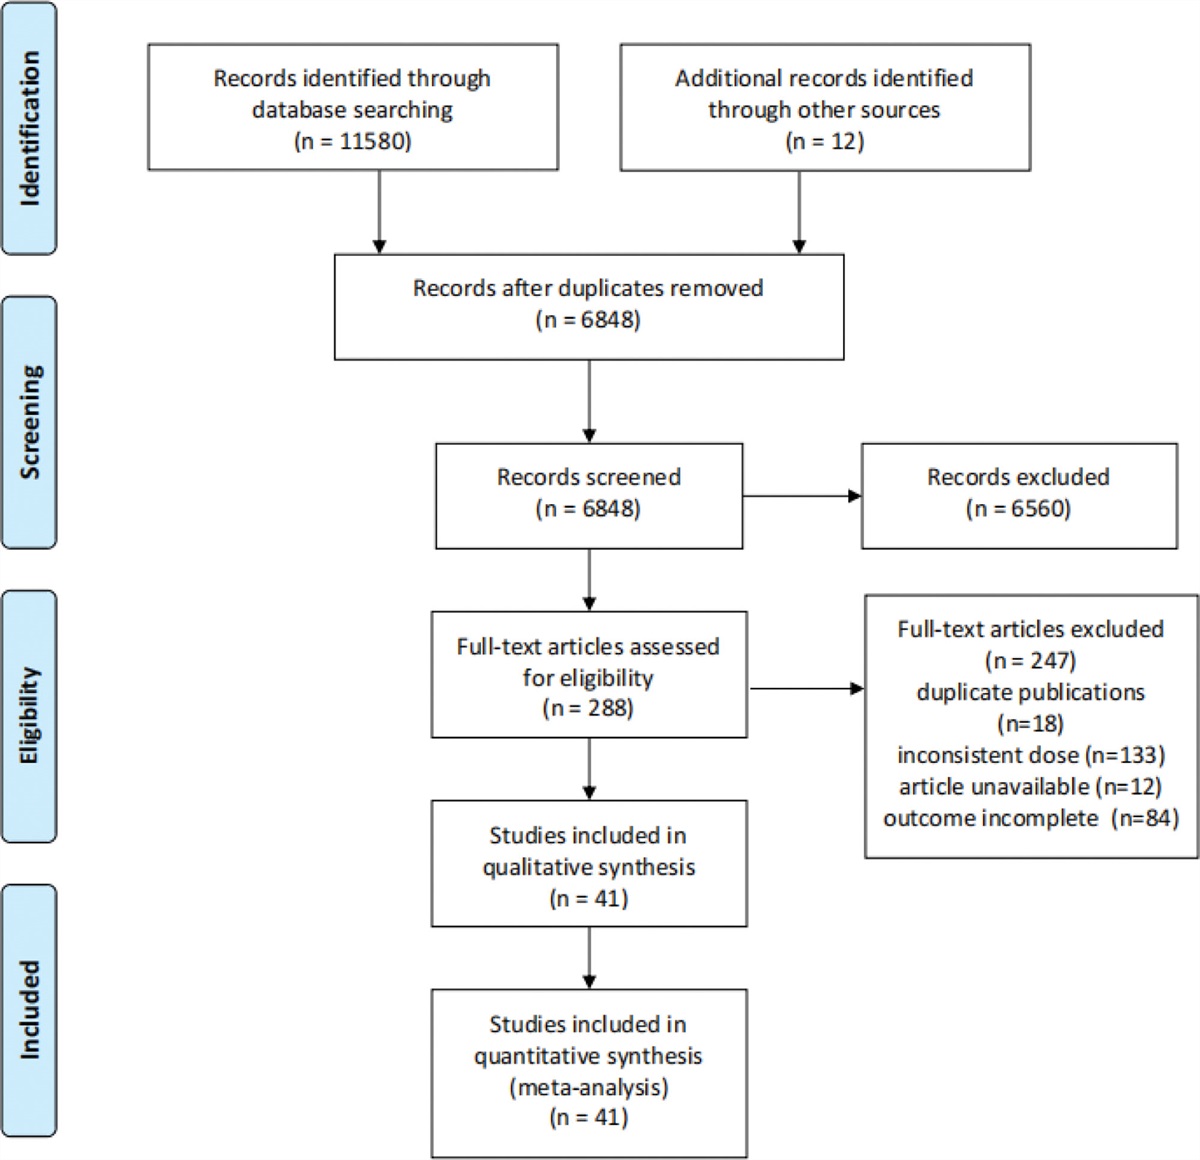 Efficacy and safety of proton pump inhibitors versus vonoprazan in treatment of erosive esophagitis: A PRISMA-compliant systematic review and network meta-analysis